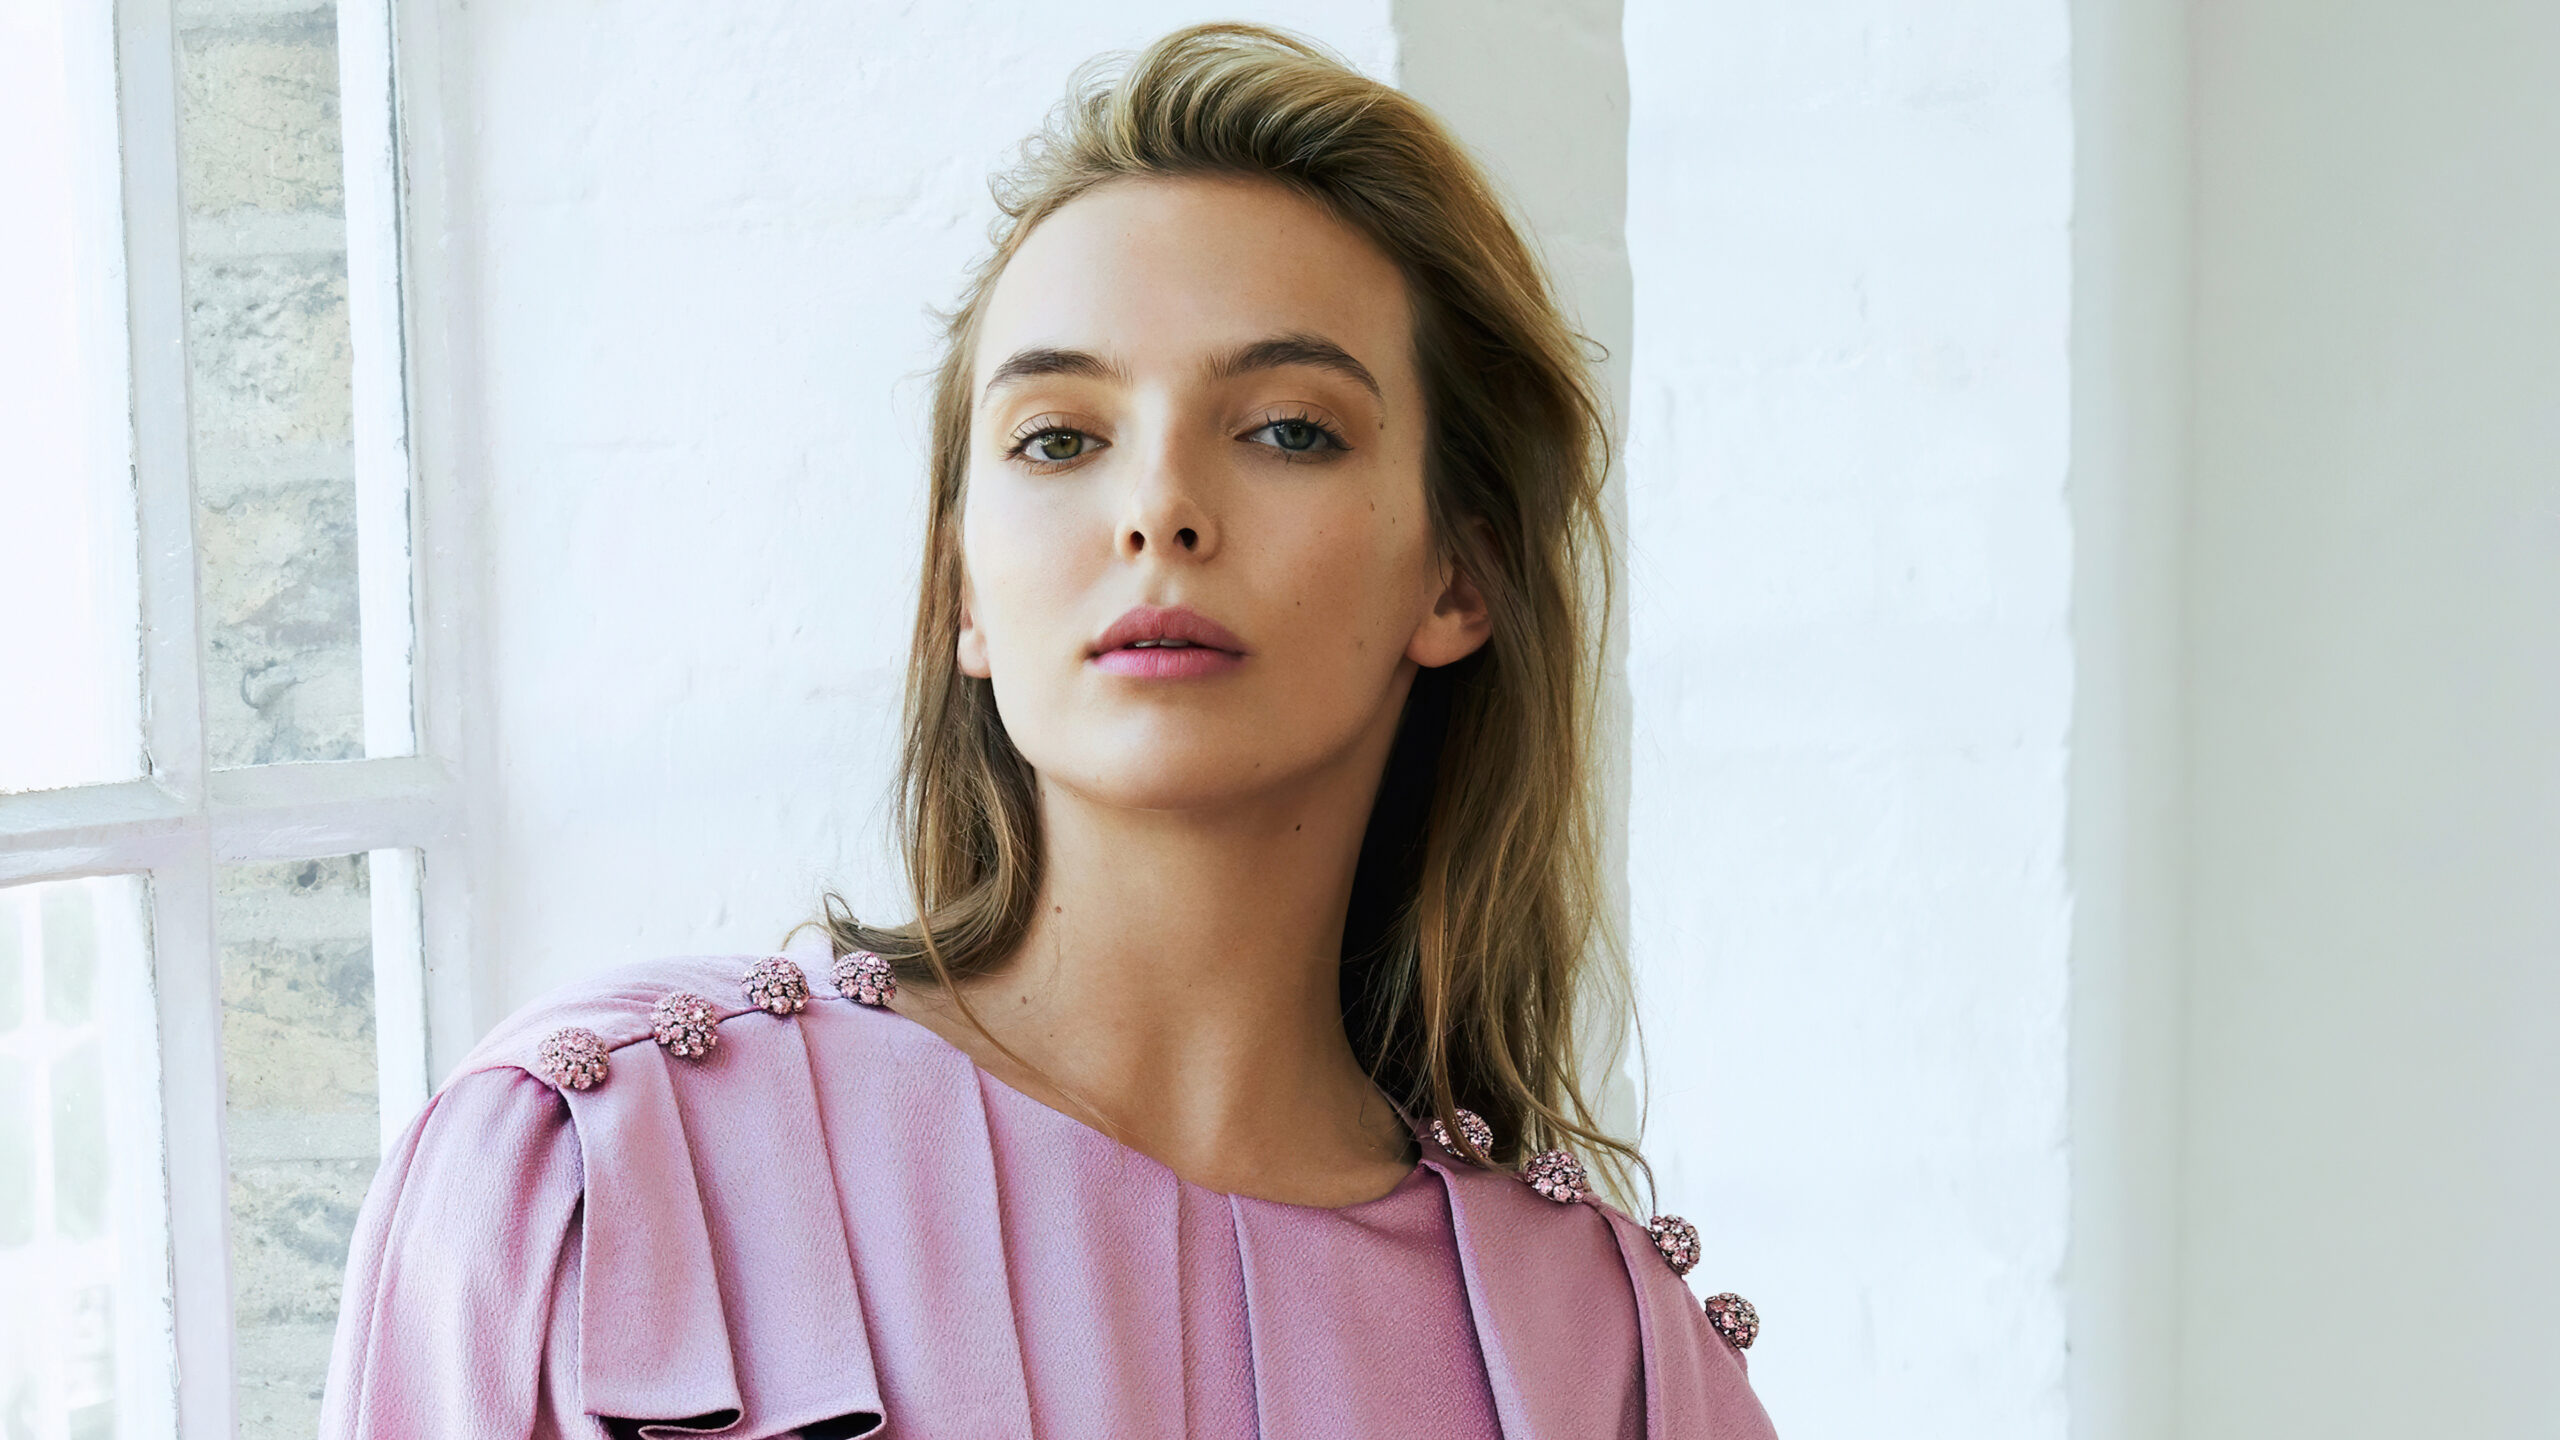 jodie_comer_is_wearing_light_pink_top_with_a_background_of_white_wall_4k_hd_celebrities